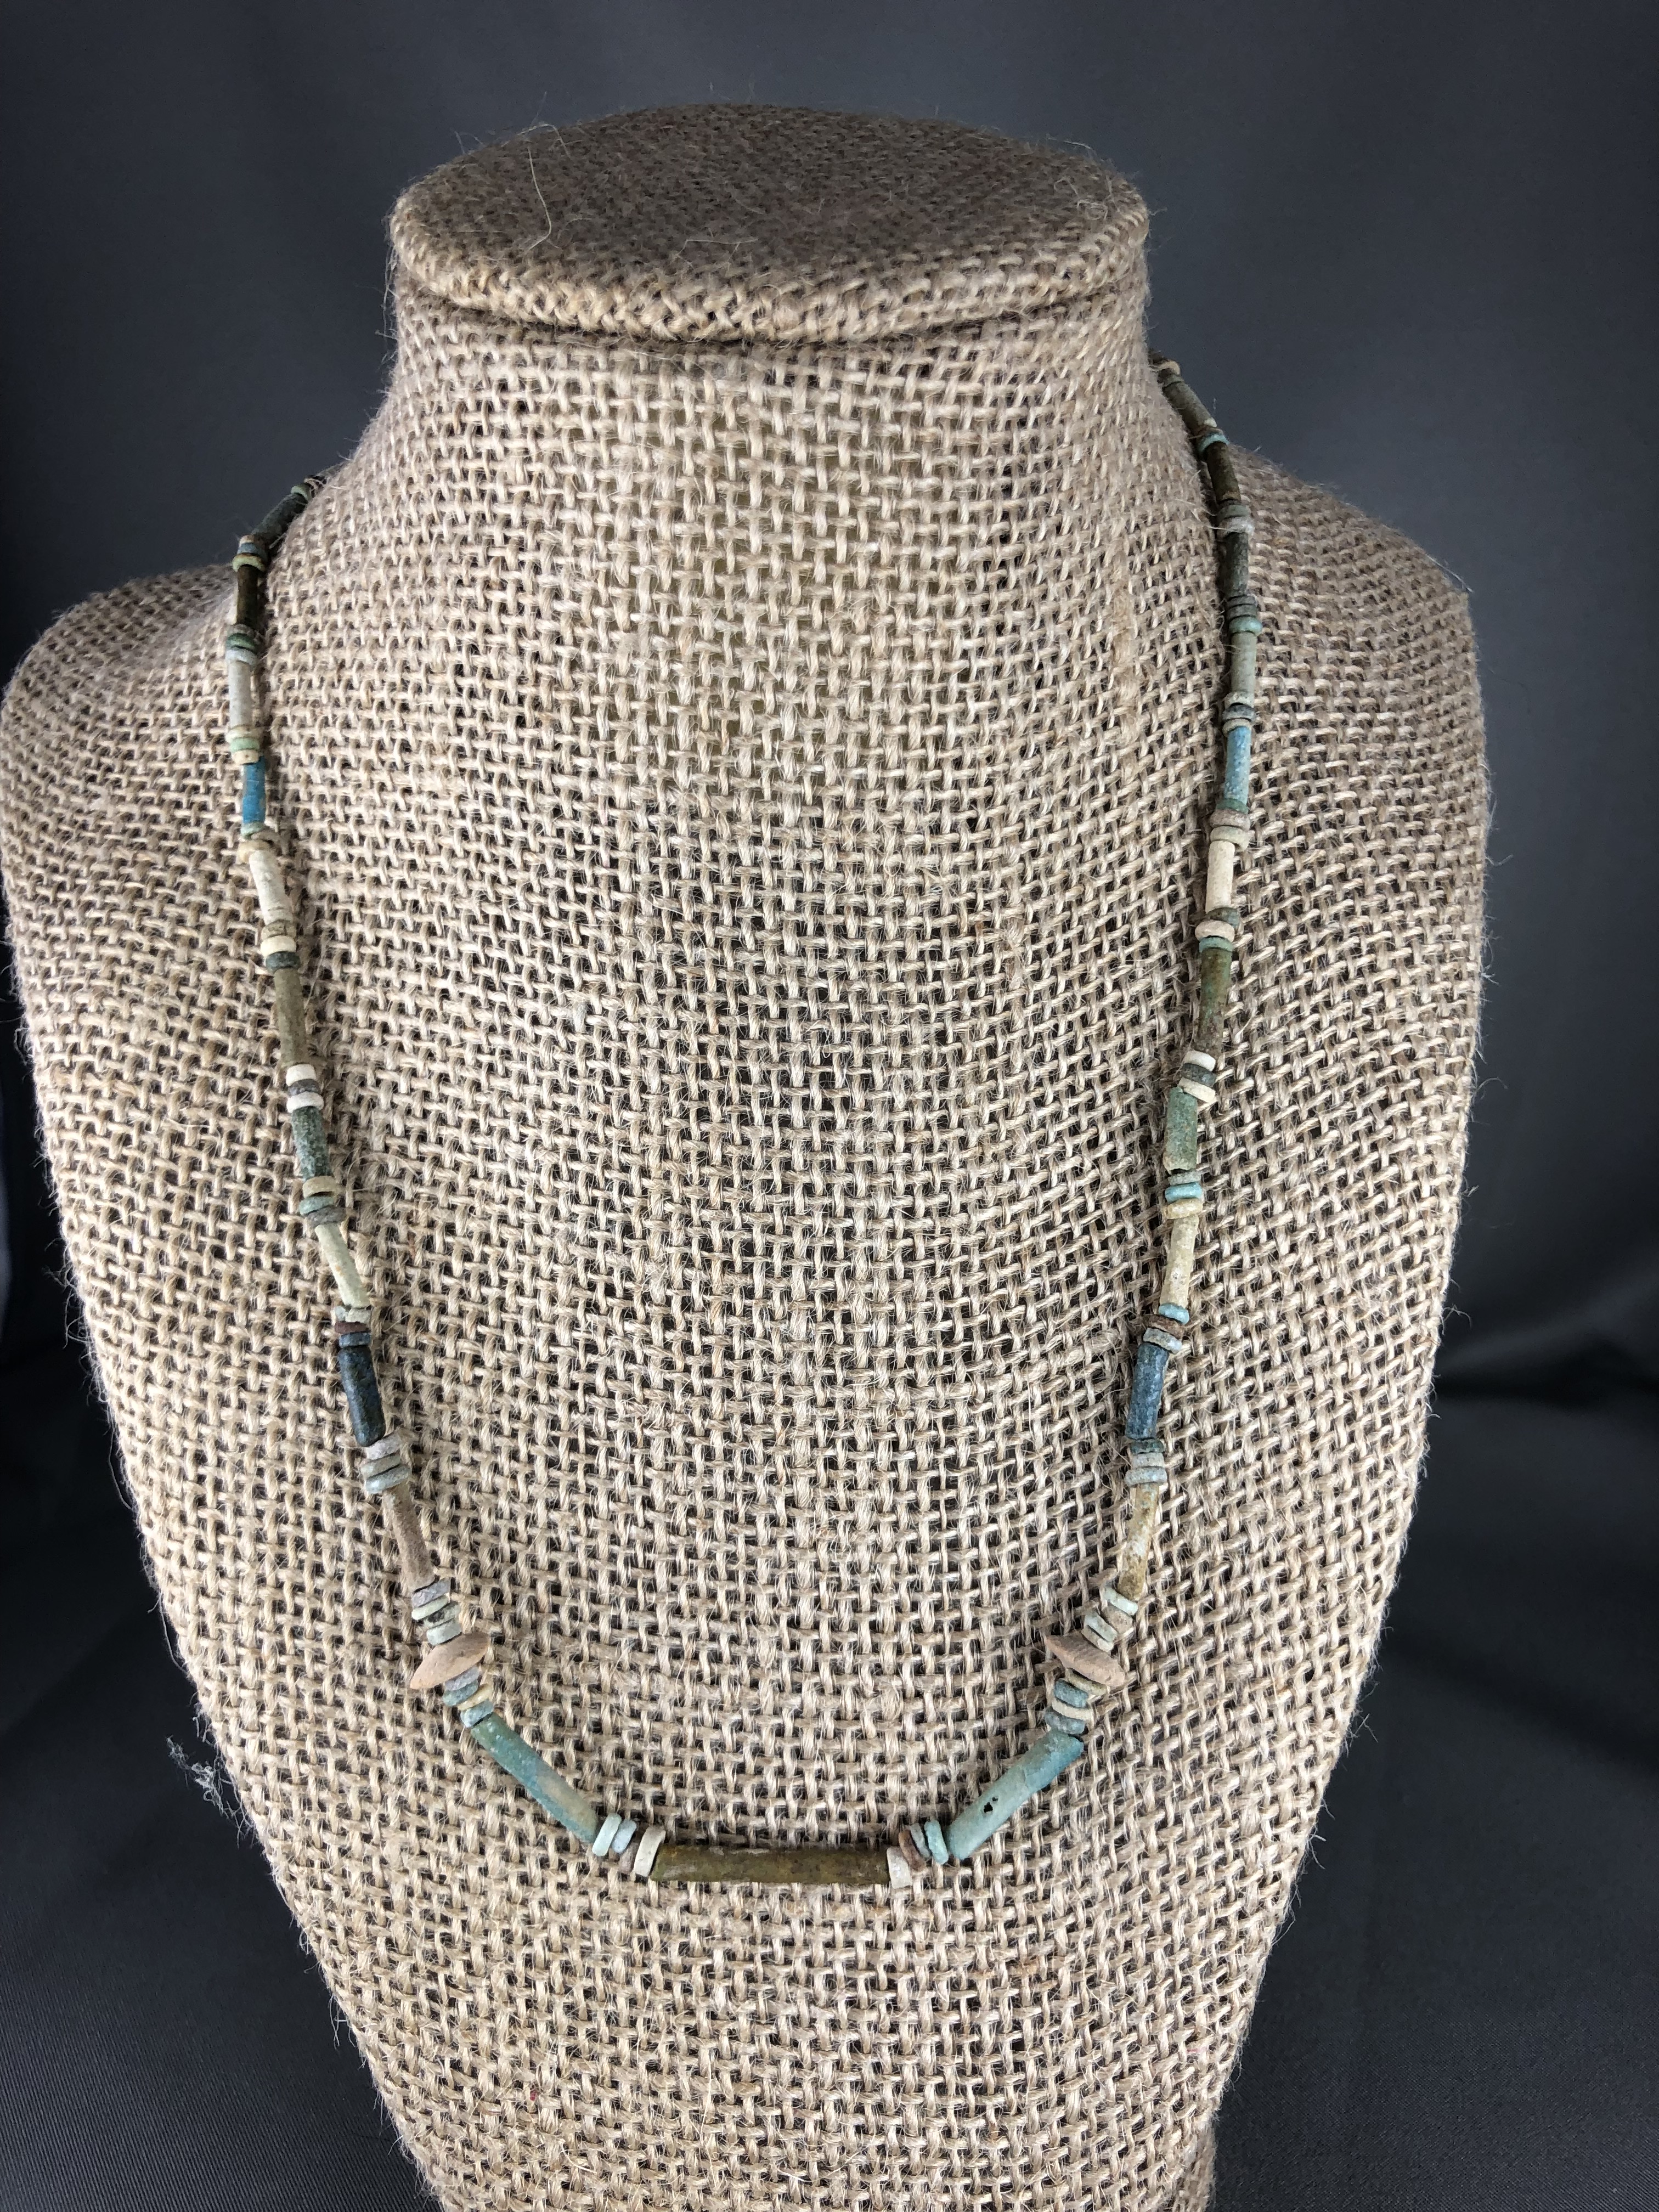 Ancient Egyptian Mummy Bead Necklace